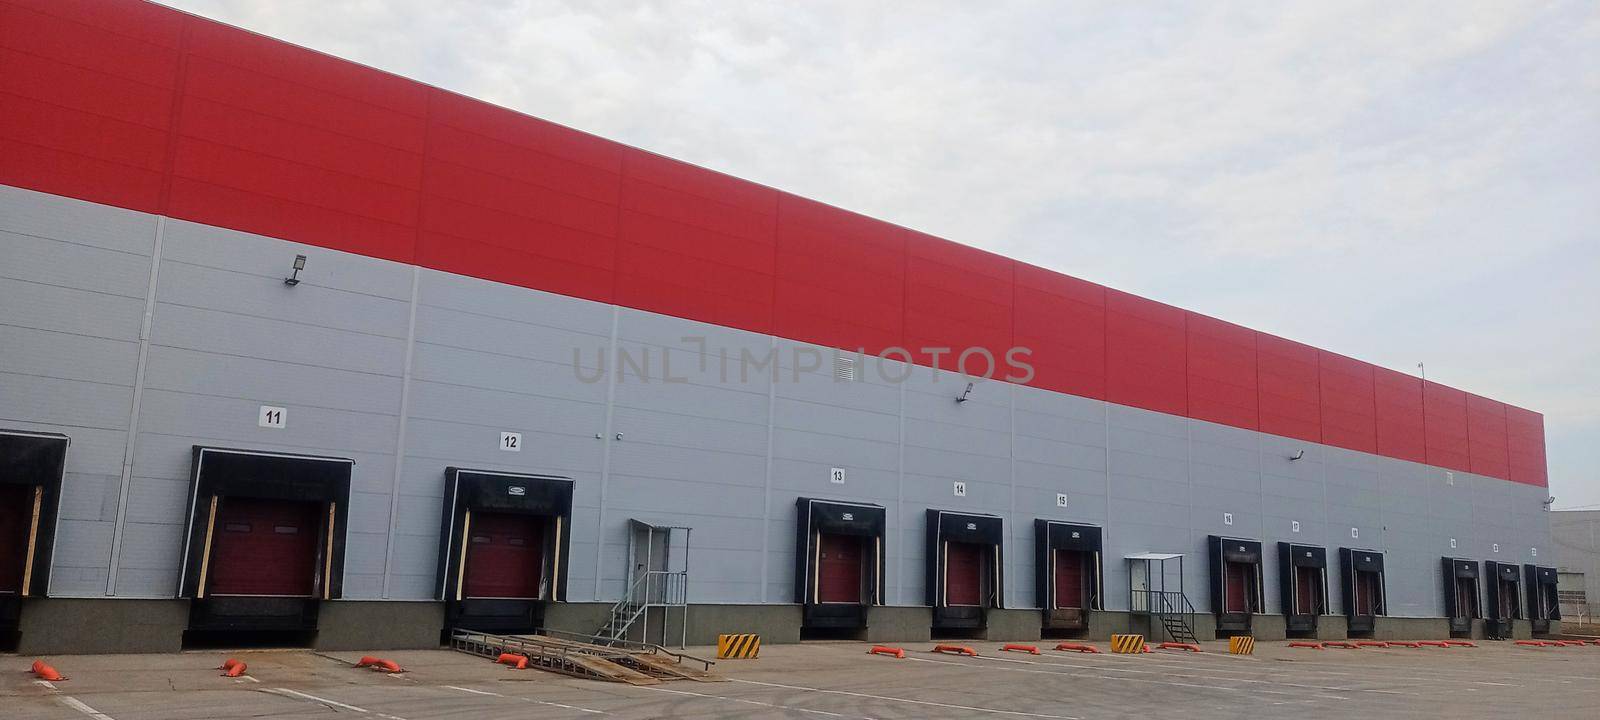 Warehouse complex. Logistic complex for storage and transportation of goods. by Verrone